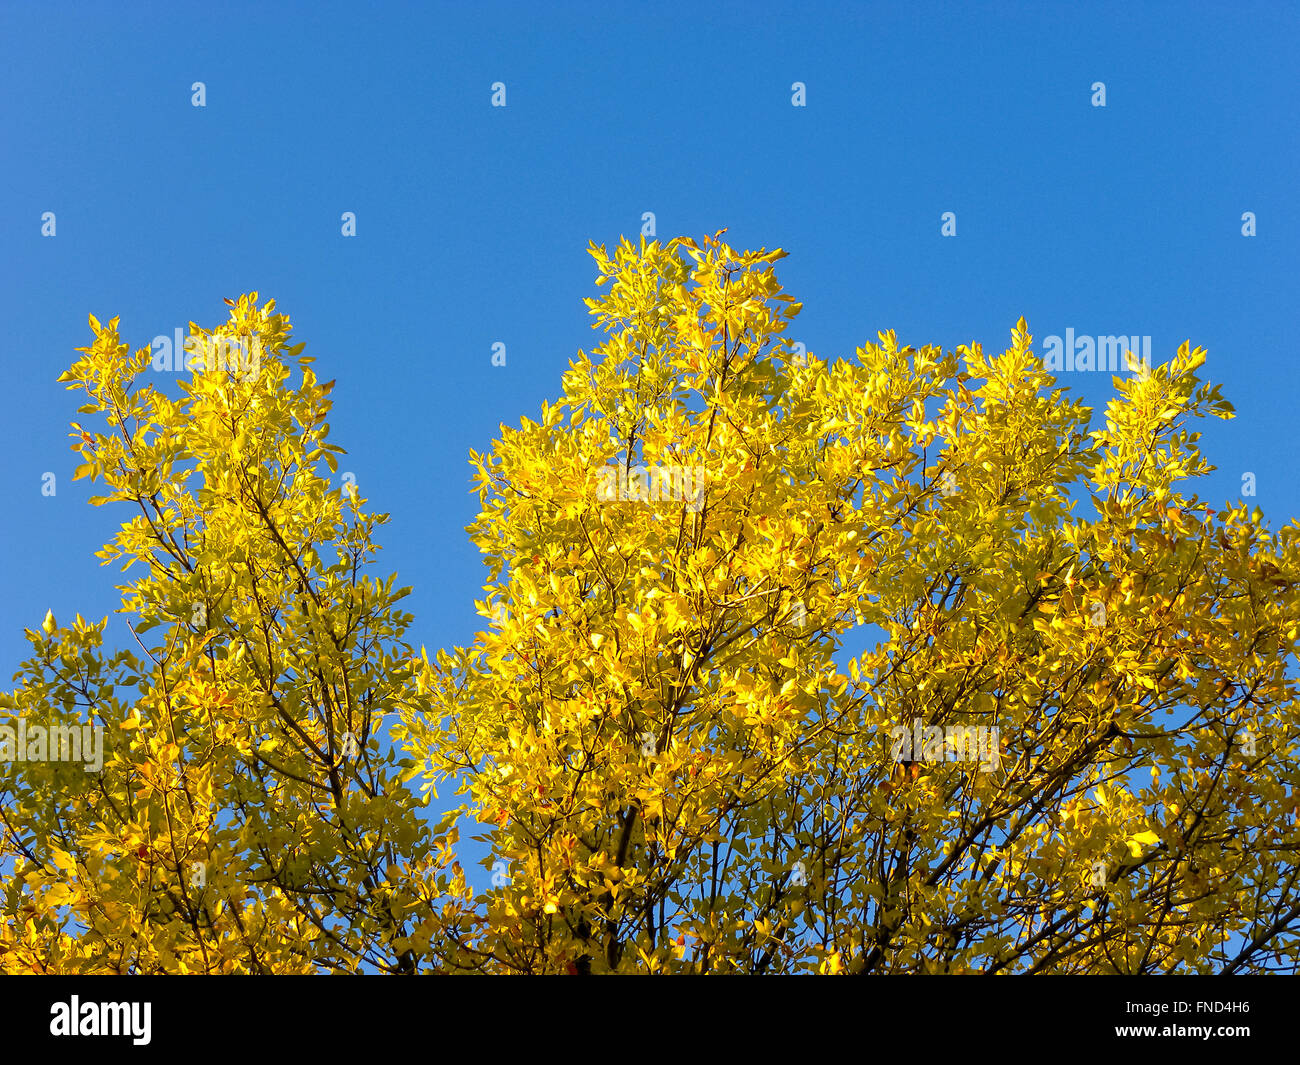 Tree with yellow leaves against bright blue sky. Stock Photo